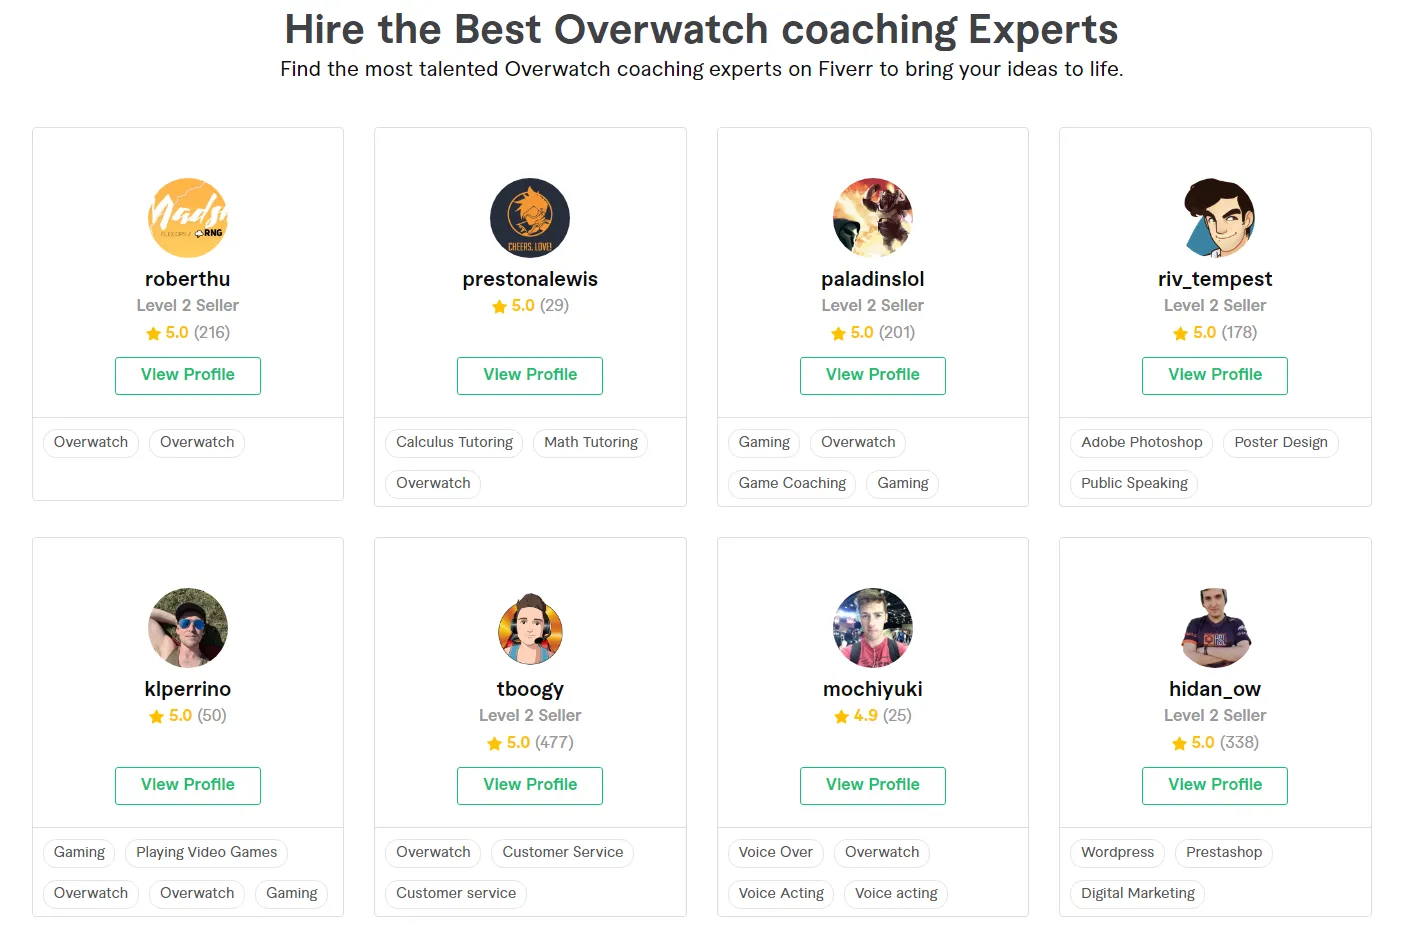 Top-rated Overwatch coaching gigs on Fiverr.